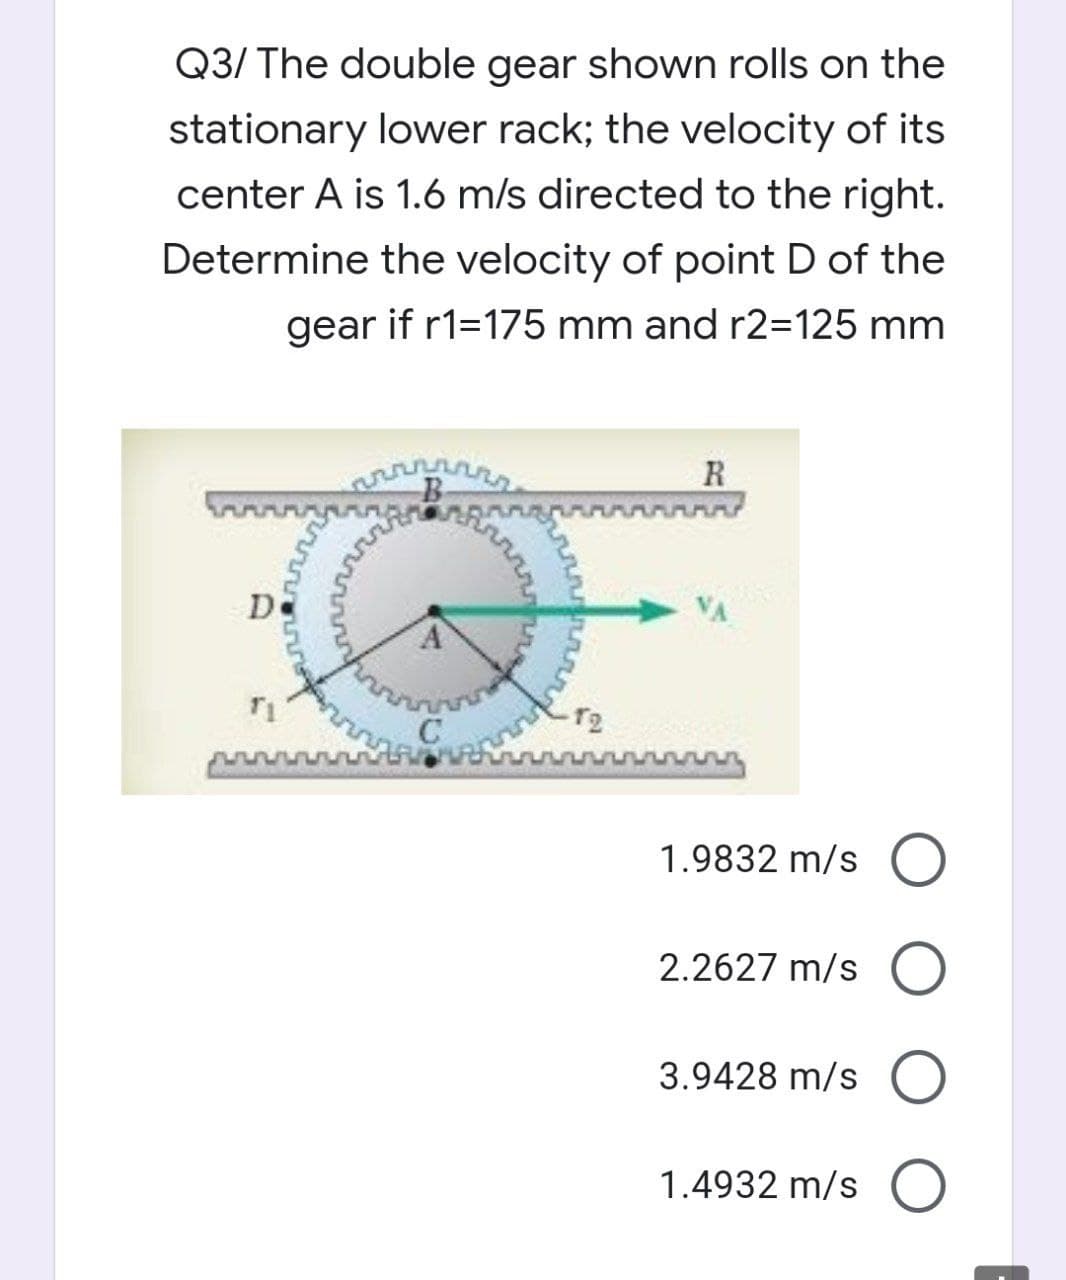 Q3/ The double gear shown rolls on the
stationary lower rack; the velocity of its
center A is 1.6 m/s directed to the right.
Determine the velocity of point D of the
gear if r1=175 mm and r2=125 mm
B
R
De
T2
1.9832 m/s O
2.2627 m/s
3.9428 m/s
1.4932 m/s O
